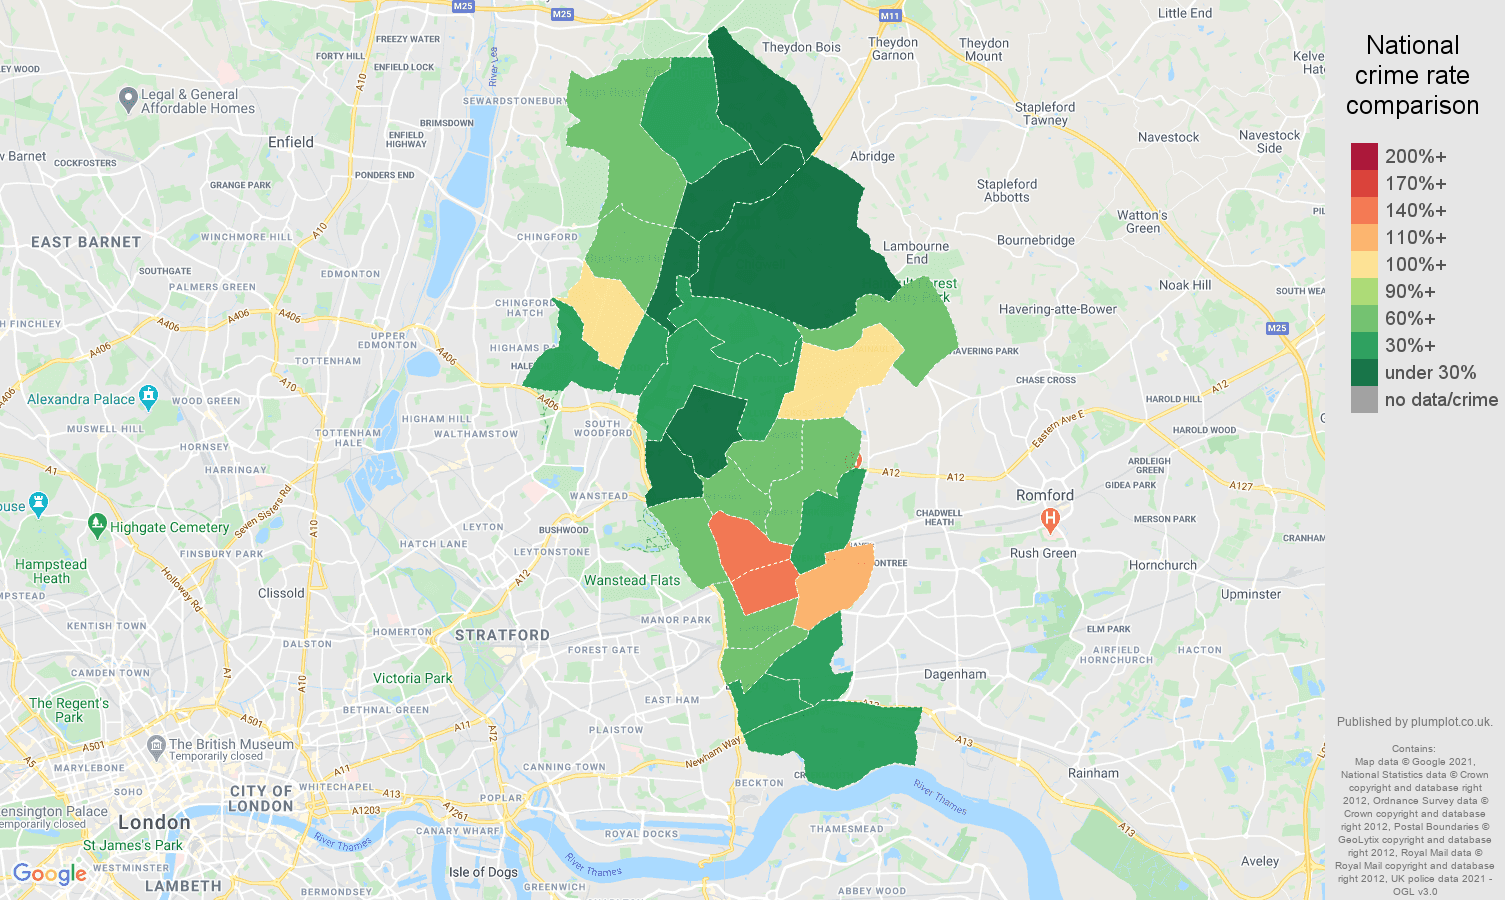 Ilford bicycle theft crime rate comparison map